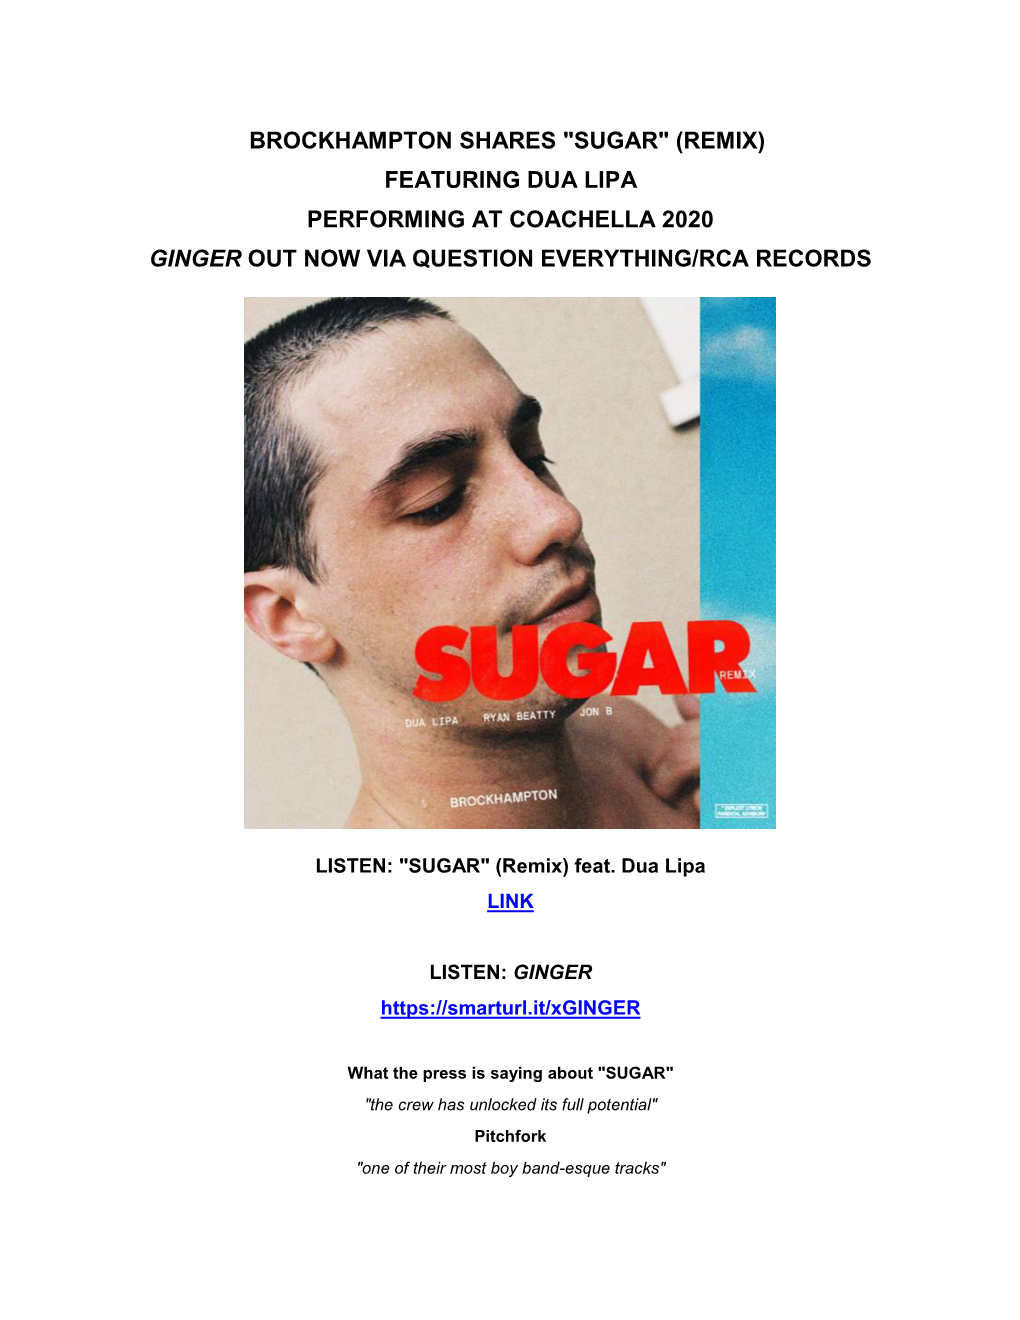 Brockhampton Shares "Sugar" (Remix) Featuring Dua Lipa Performing at Coachella 2020 Ginger out Now Via Question Everything/Rca Records